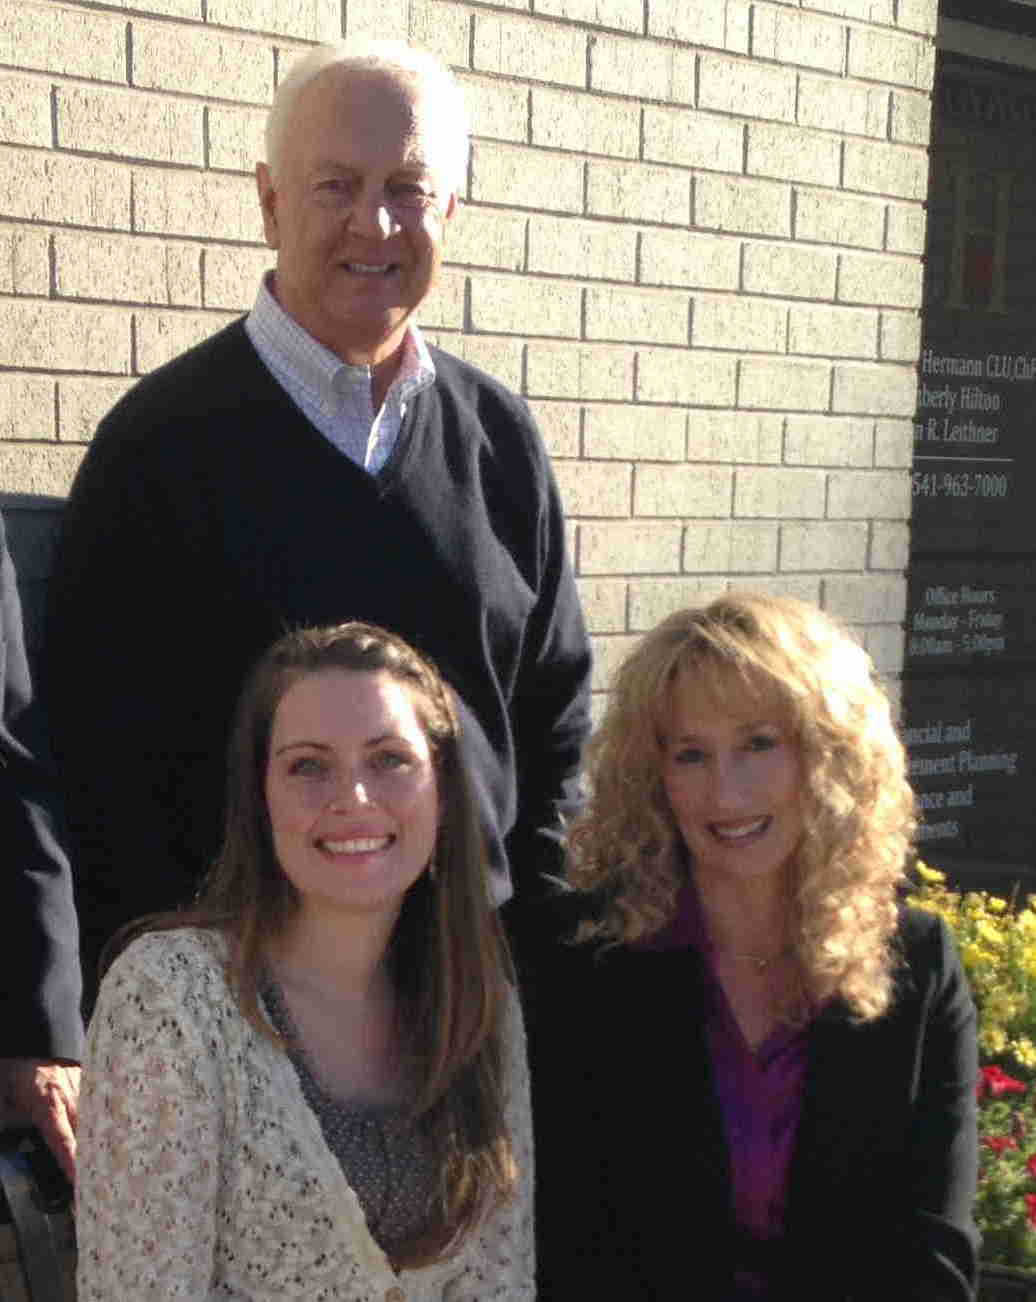 A group picture of Bill Hermann, his  and associate Kimberly Hilton, and his associates John Leithner and Shelly Rogers.